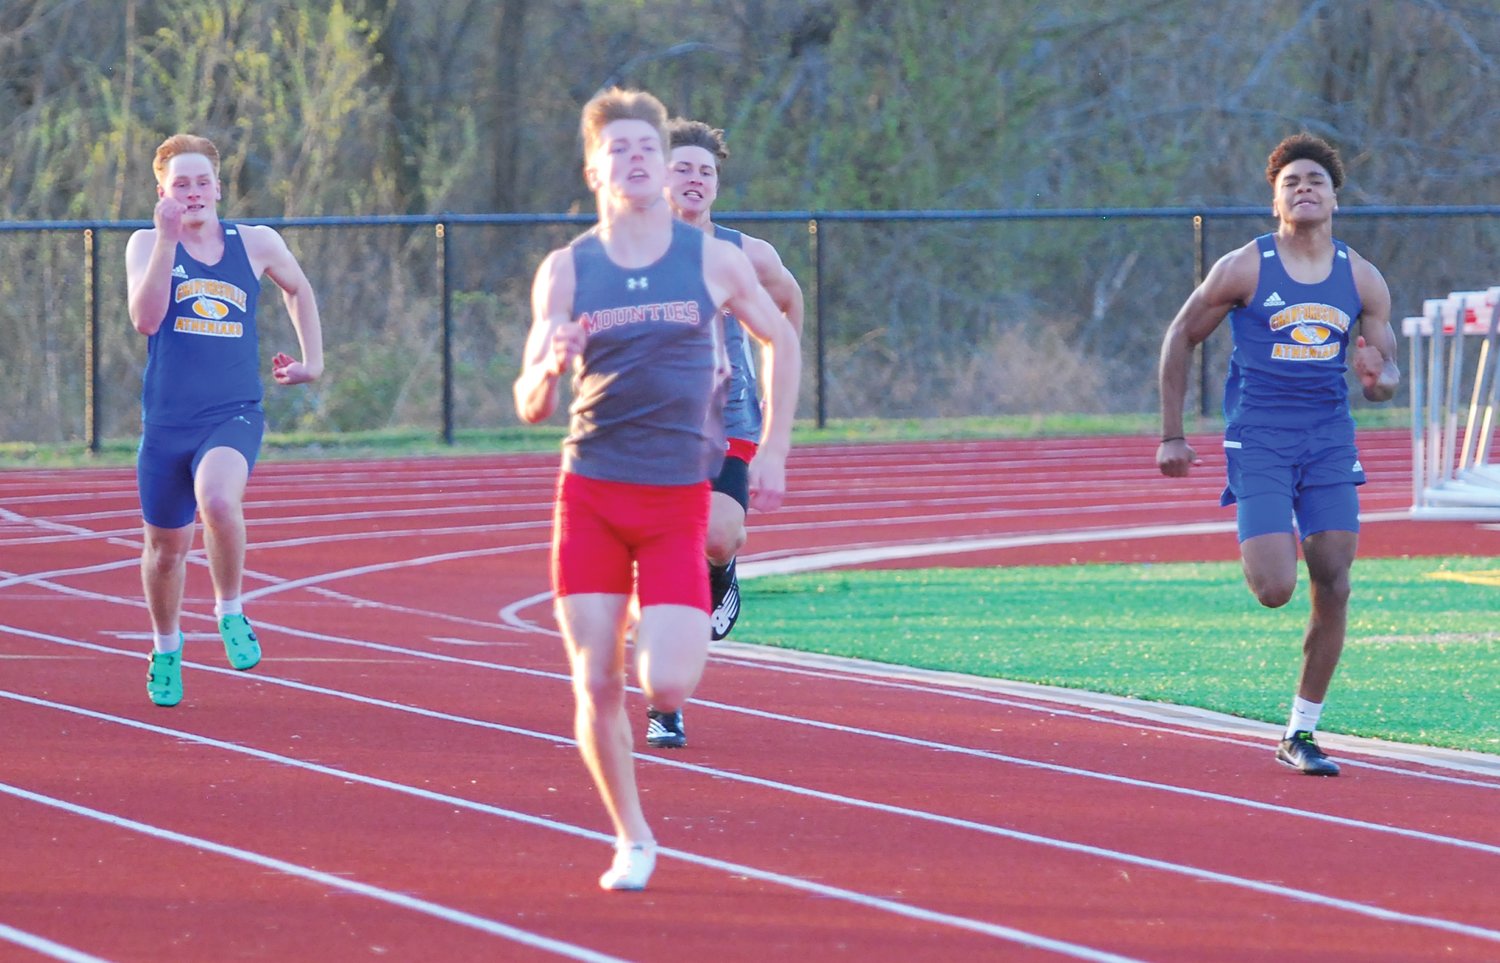 Trent Jones will look to make it back to the State Finals this season as he qualified for the 400 a season ago.